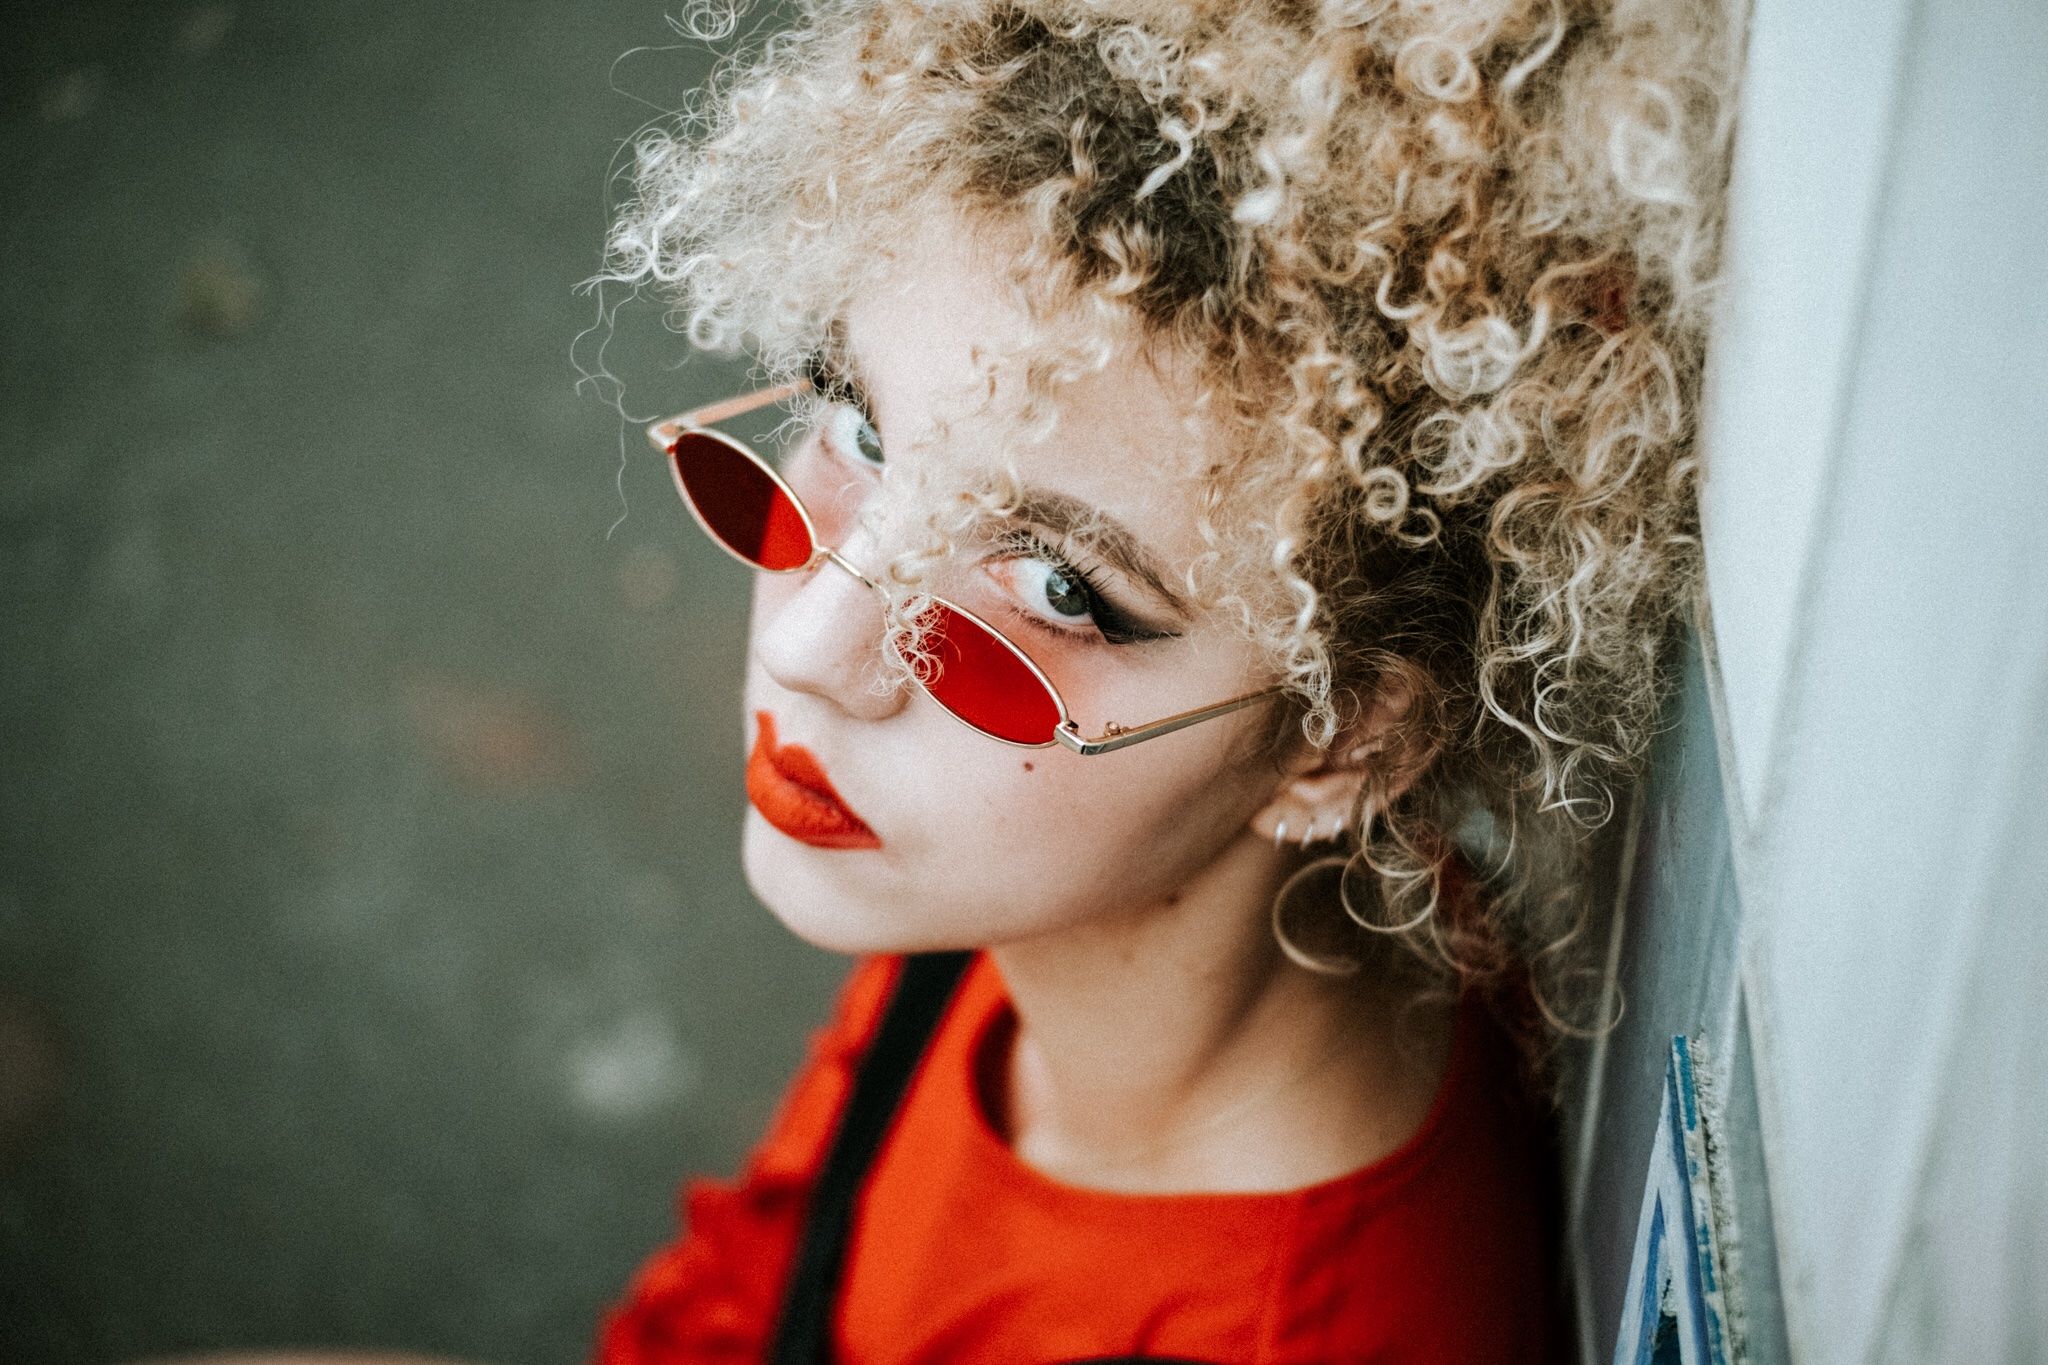 childhood, headshot, child, real people, one person, lifestyles, portrait, curly hair, indoors, hair, close-up, hairstyle, front view, leisure activity, red, glasses, mask - disguise, disguise, innocence